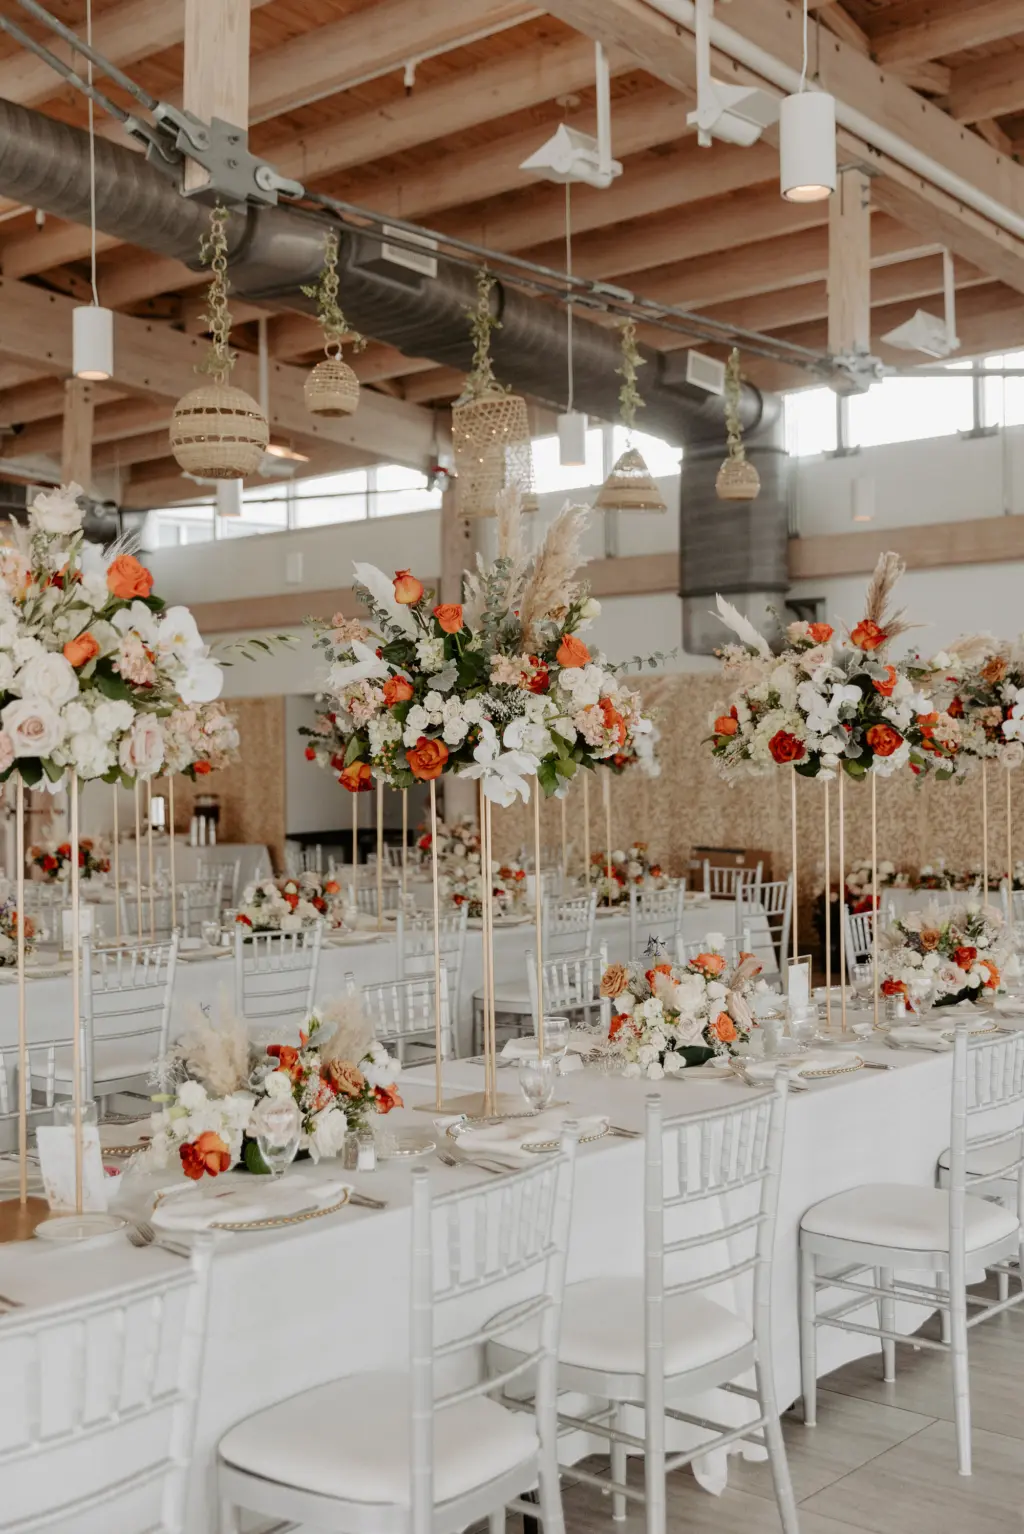 Boho Wedding Reception Inspiration | Silver Chiavari Chairs with White Linen and Long Feasting Tables | Orange, Pink, and White Roses with Greenery Centerpiece Ideas